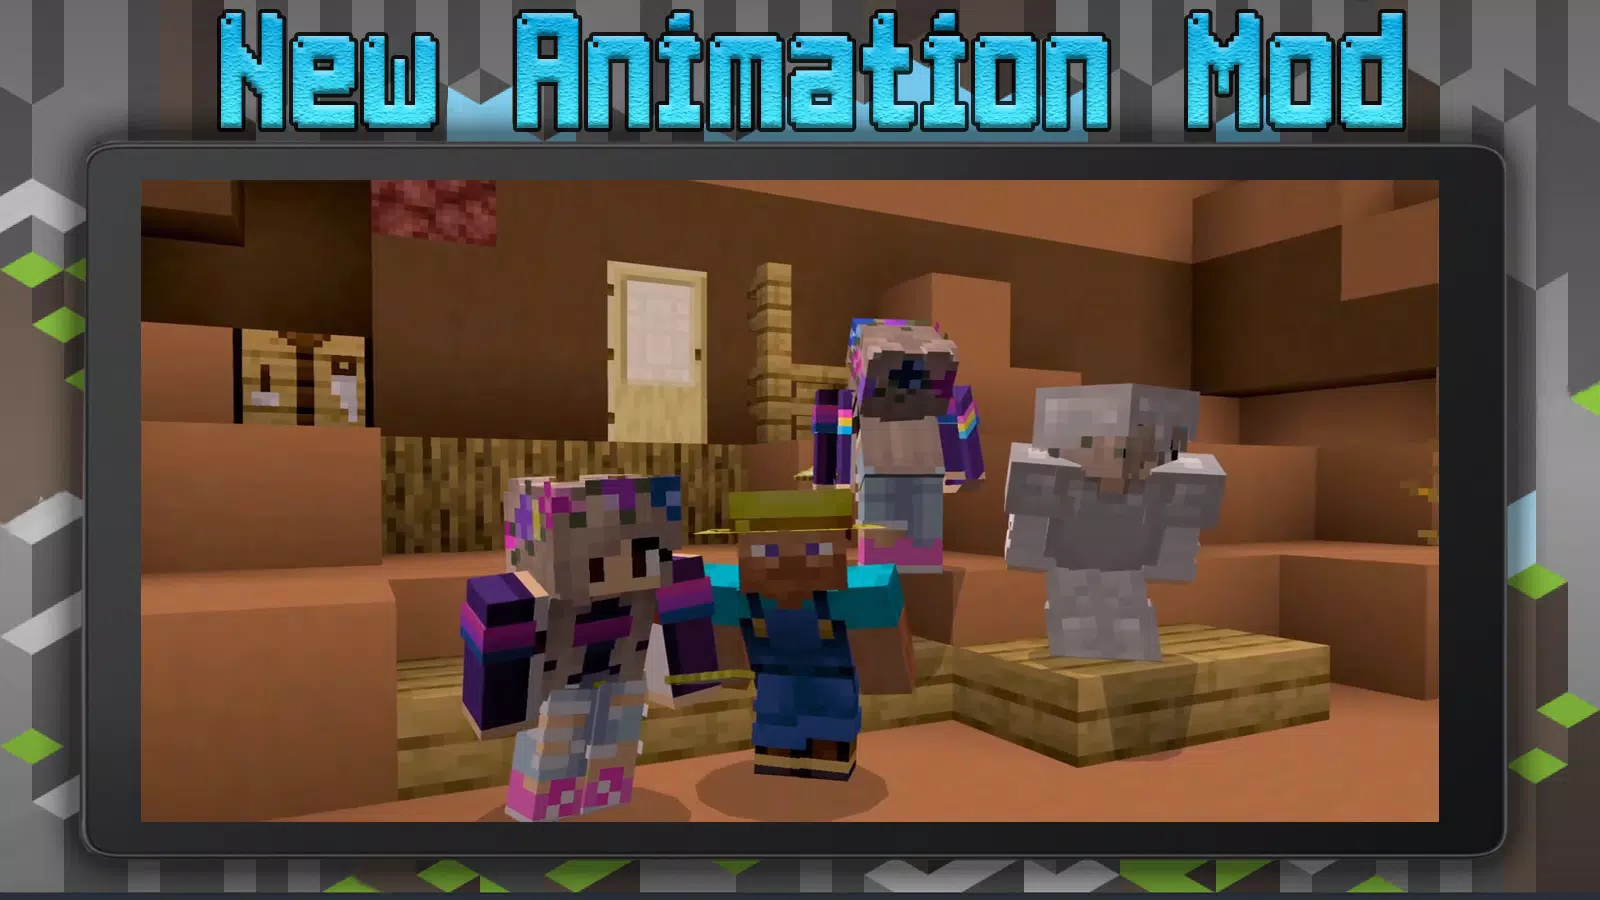 Animation Player Mod Minecraft APK for Android Download